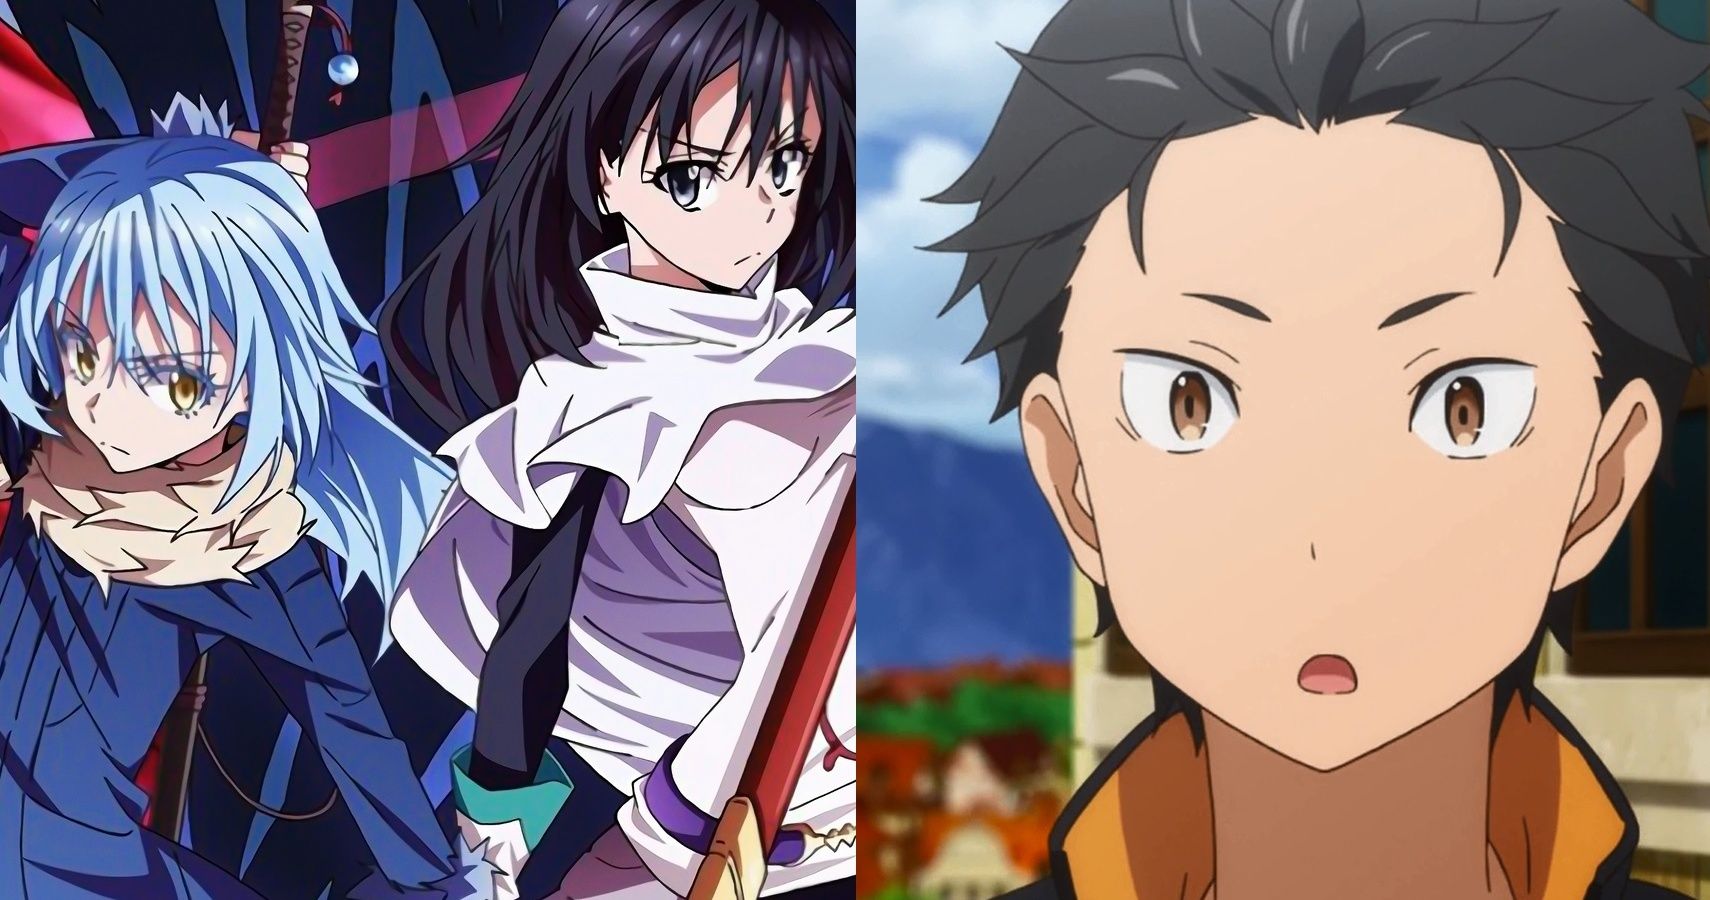 15 Most Common Tropes In Shojo Anime (& Which Anime Did Them Best)